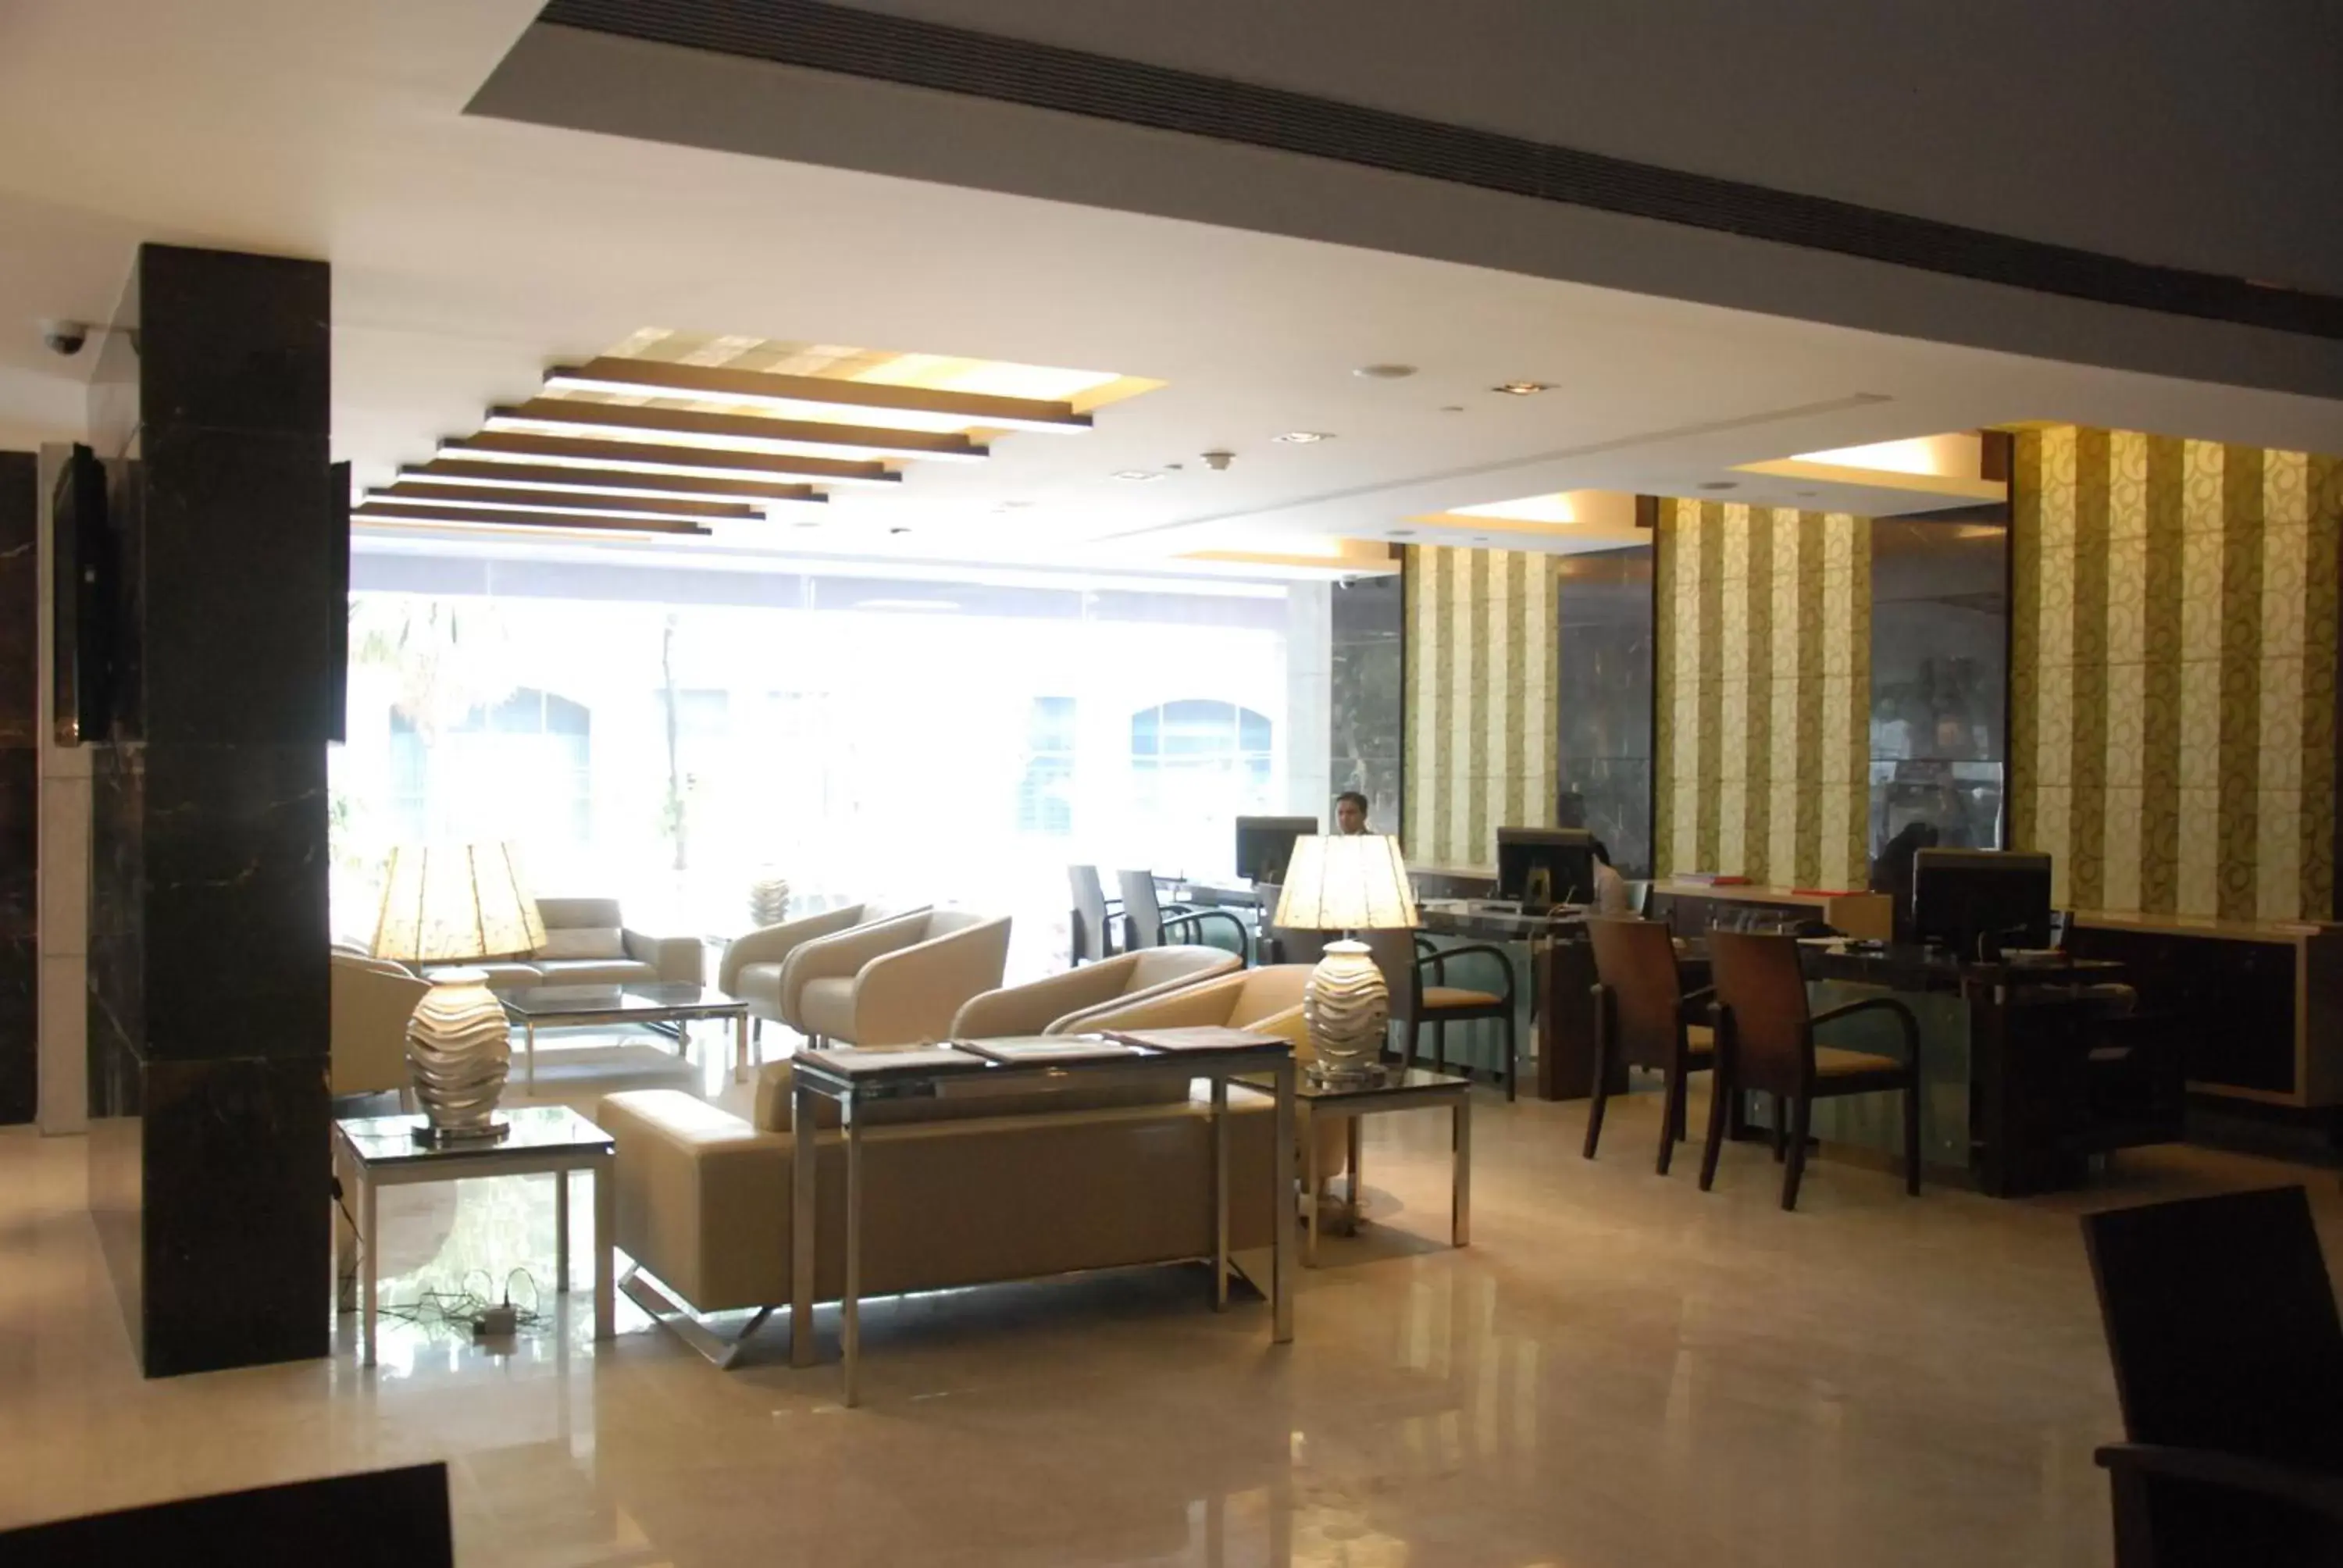 Lobby or reception in Ramee Grand Hotel and Spa, Pune